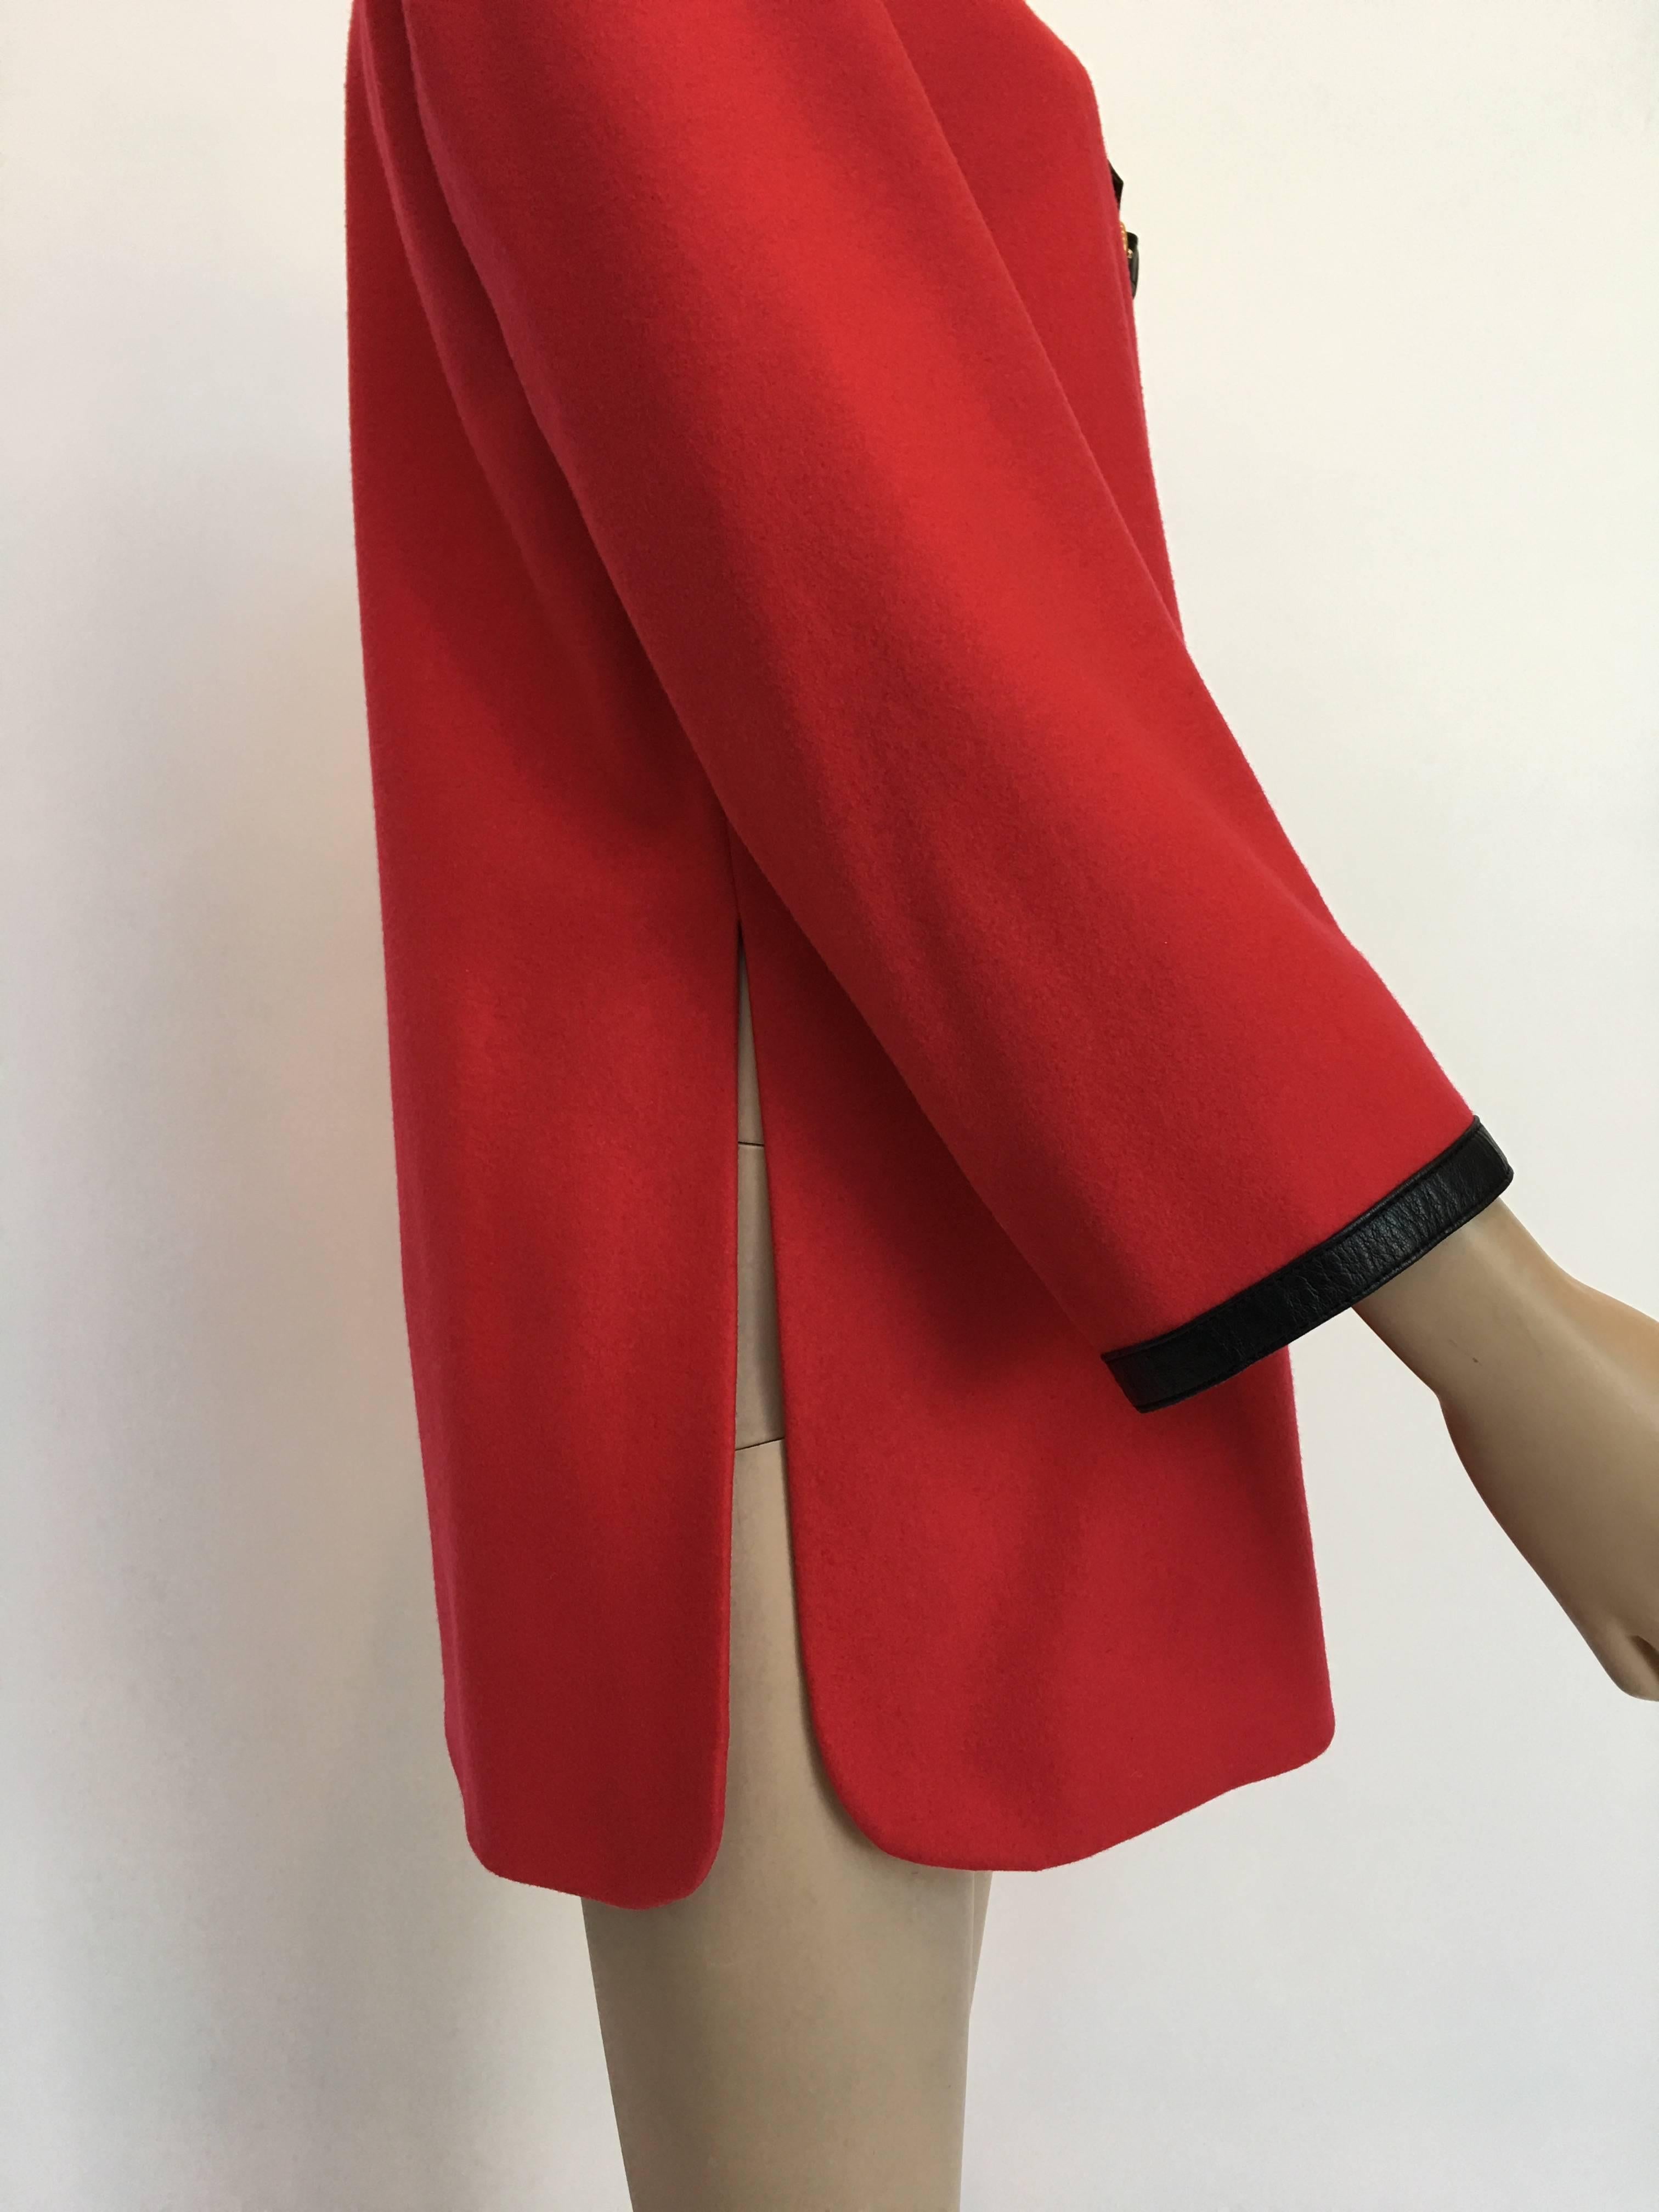 Hermes 1970's Crimson Red Tunic Top with Black Leather Strapping In Good Condition For Sale In Los Angeles, CA